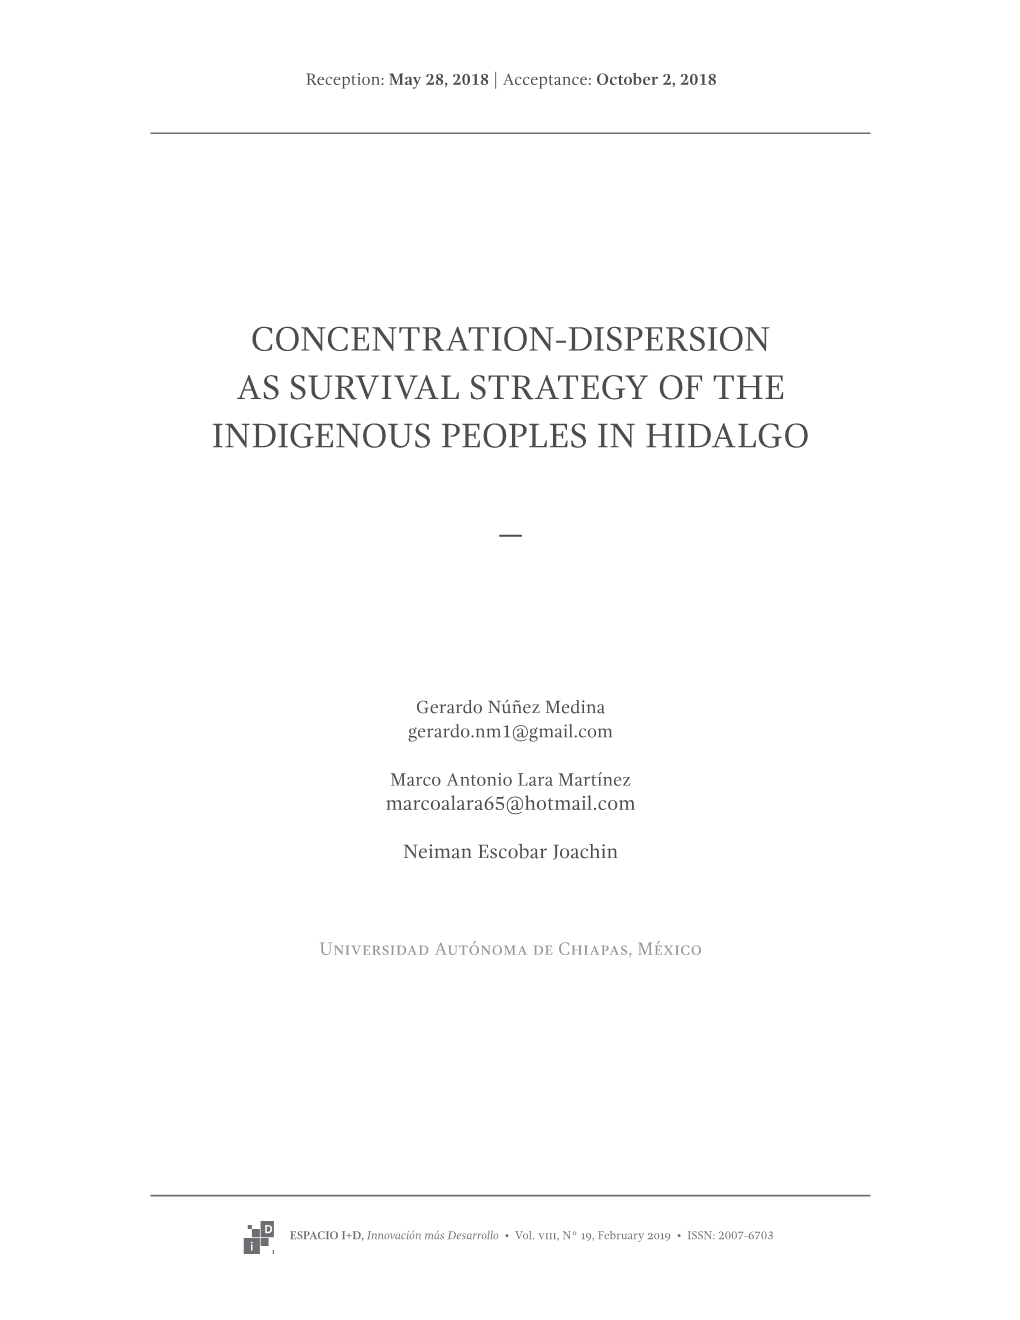 Concentration-Dispersion As Survival Strategy of the Indigenous Peoples in Hidalgo